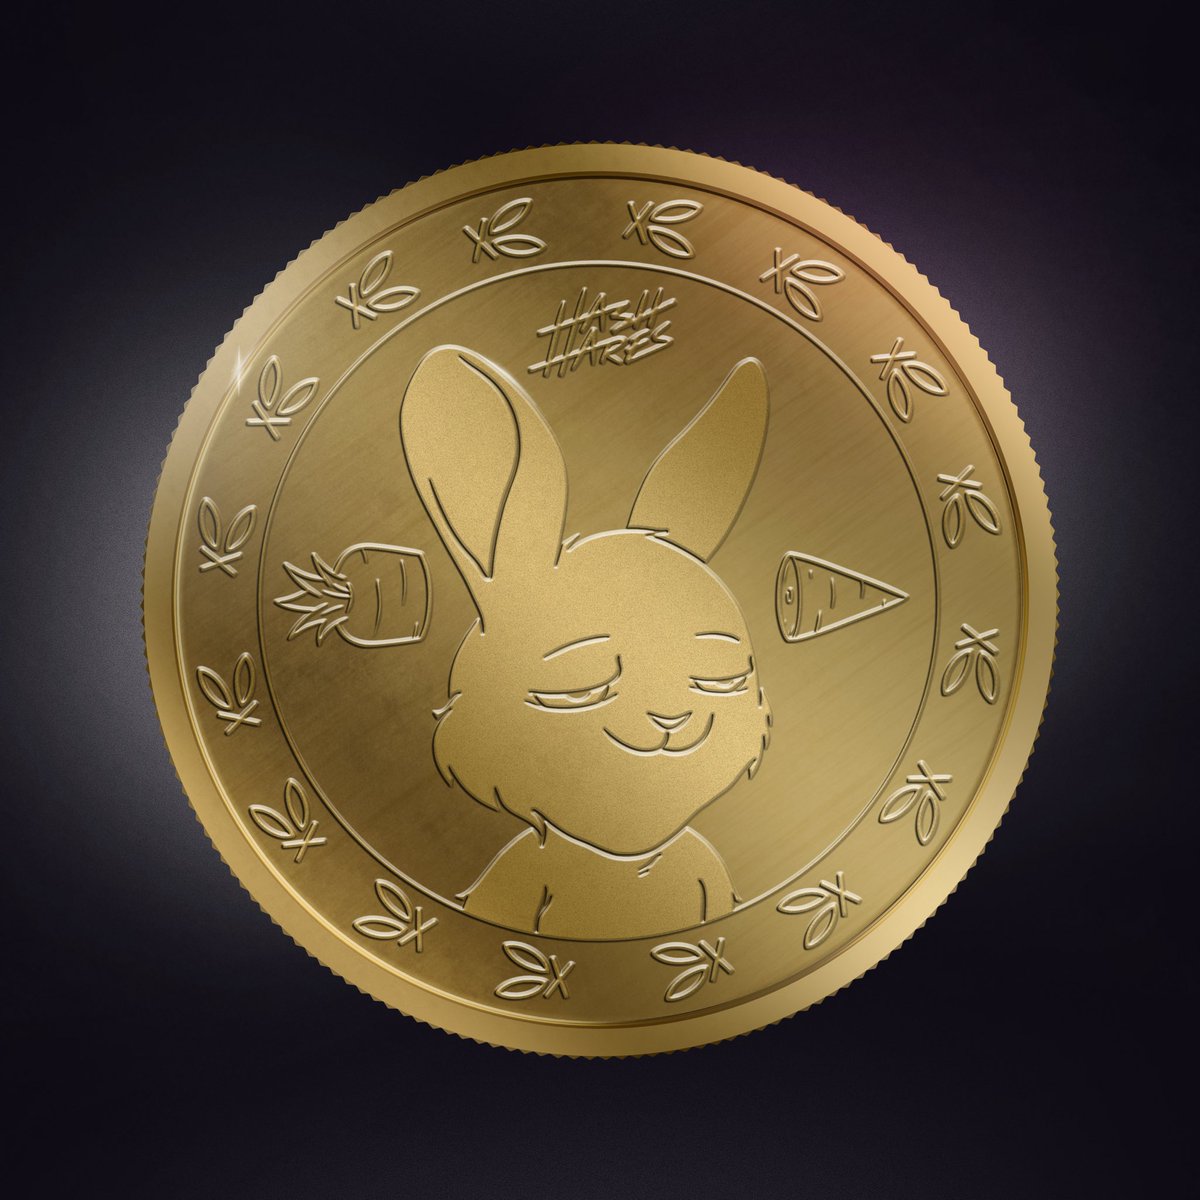 Hash Hare Army🫡 Our Google form will be posted in discord in 30 minutes. WL holders can submit wallet address for Carrot Coins 🥕🪙 The first 50 submissions will be entered into the first draw, to determine who gets Gold and who get Platinum🥕🪙 discord.com/channels/10211…